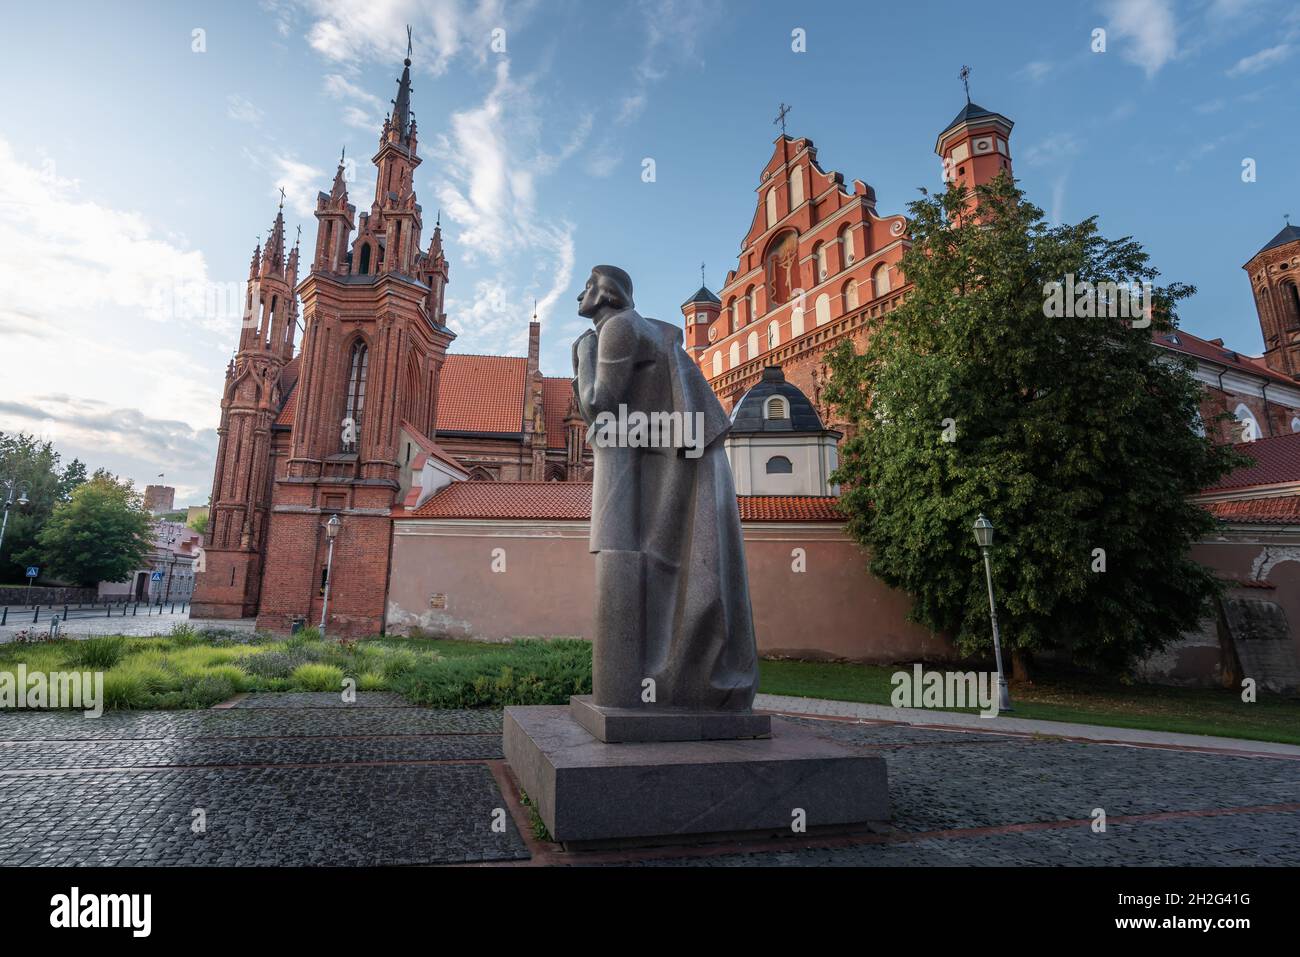 Adam Mickiewicz Monument (created by Gediminas Jokubonis in 1984) in front of Church of St. Anne and Bernardine Church - Vilnius, Lithuania Stock Photo